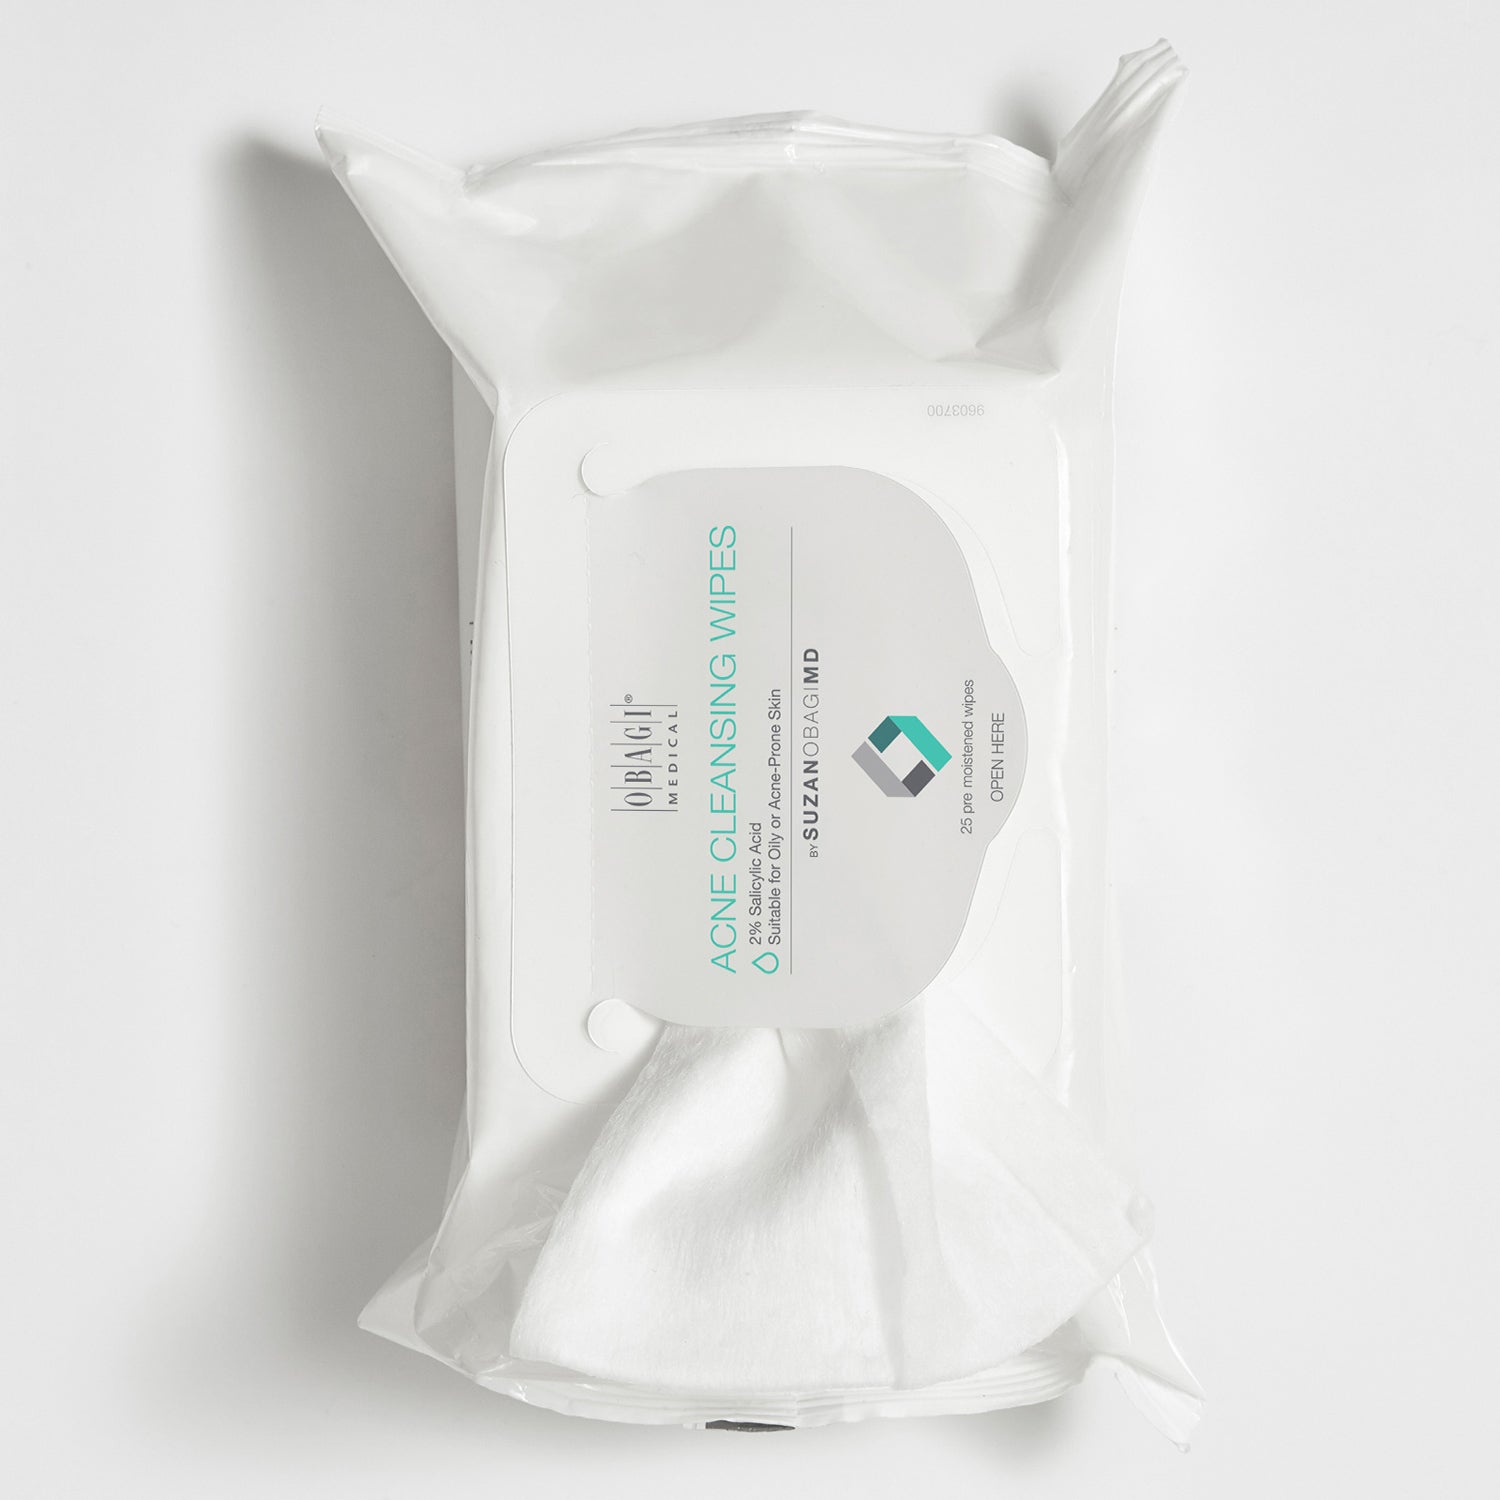 Obagi medical suzanobagimd acne cleansing wipes from MyExceptionalSkinCare.com Open